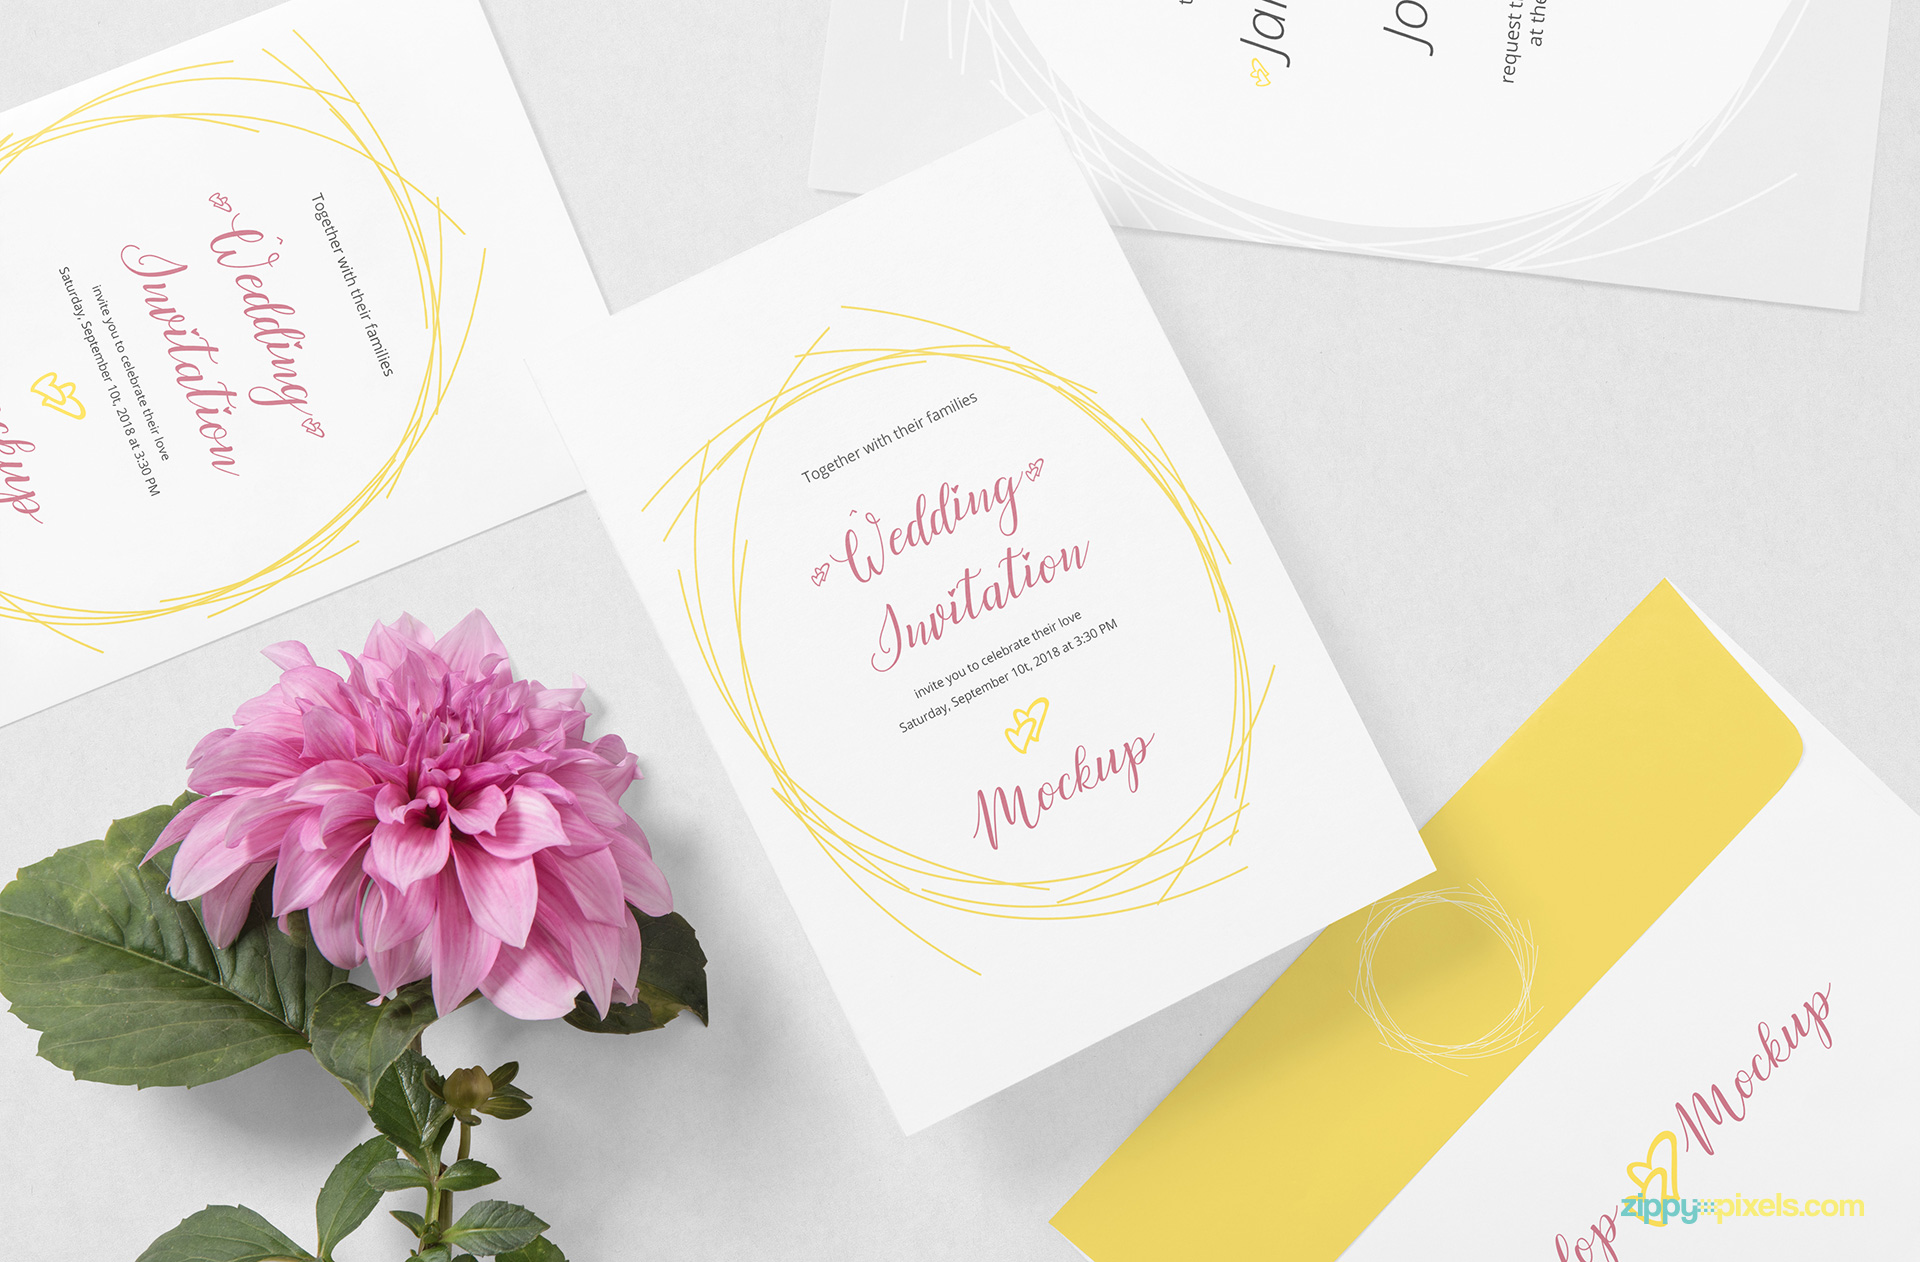 Download 45 Free Wedding Psd Mockups For Creative Wedding Design And Premium Version Free Psd Templates